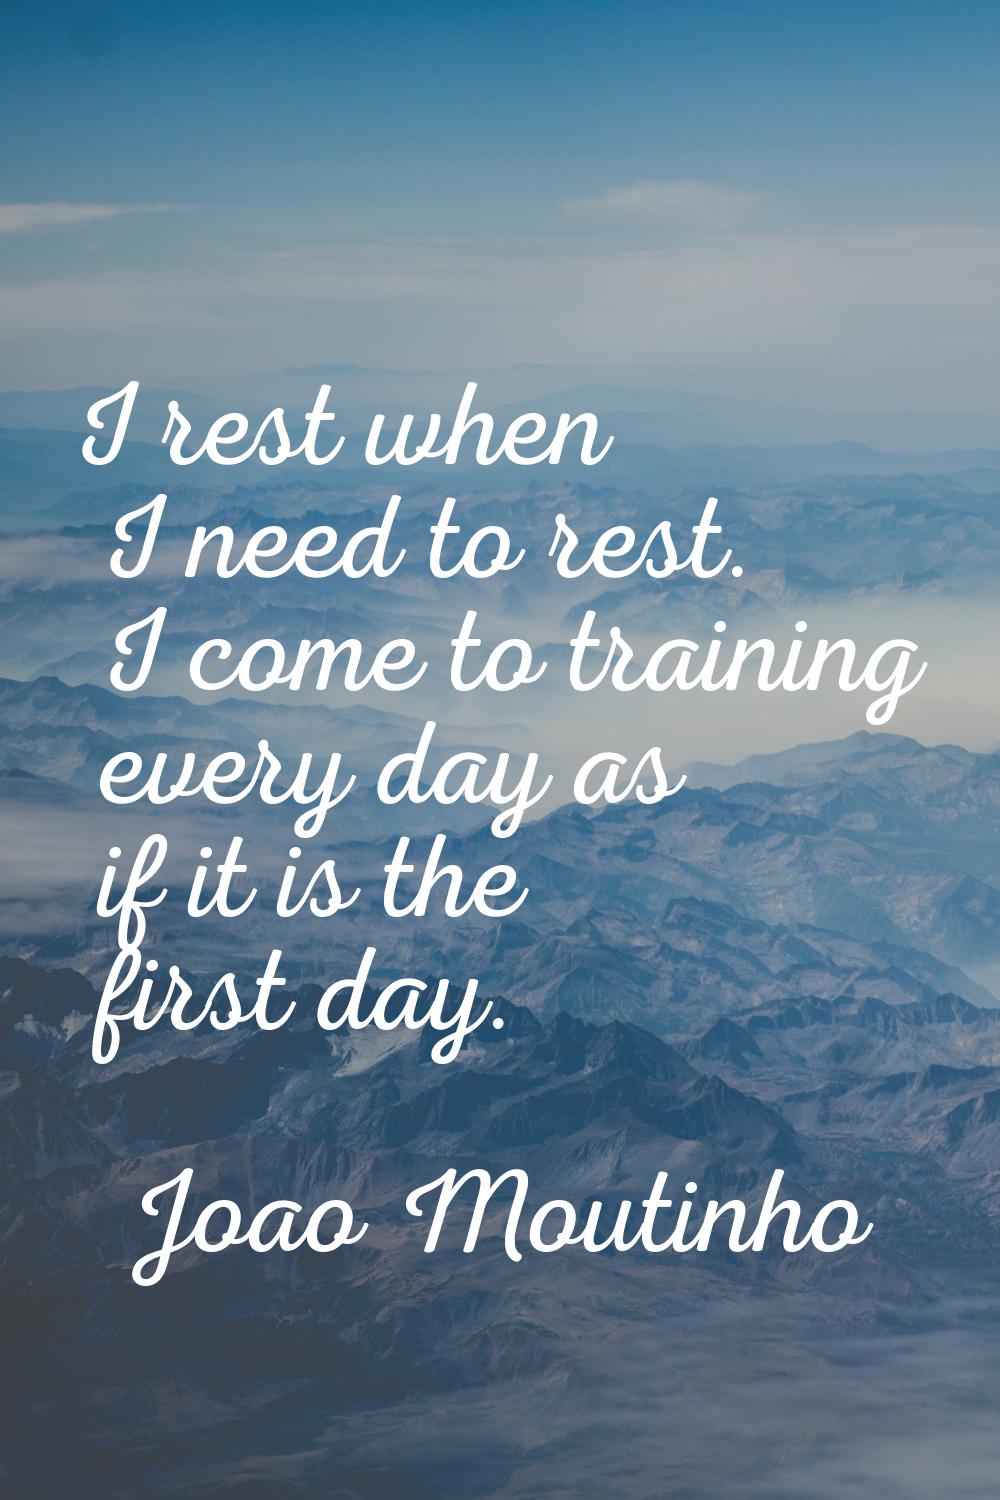 I rest when I need to rest. I come to training every day as if it is the first day.